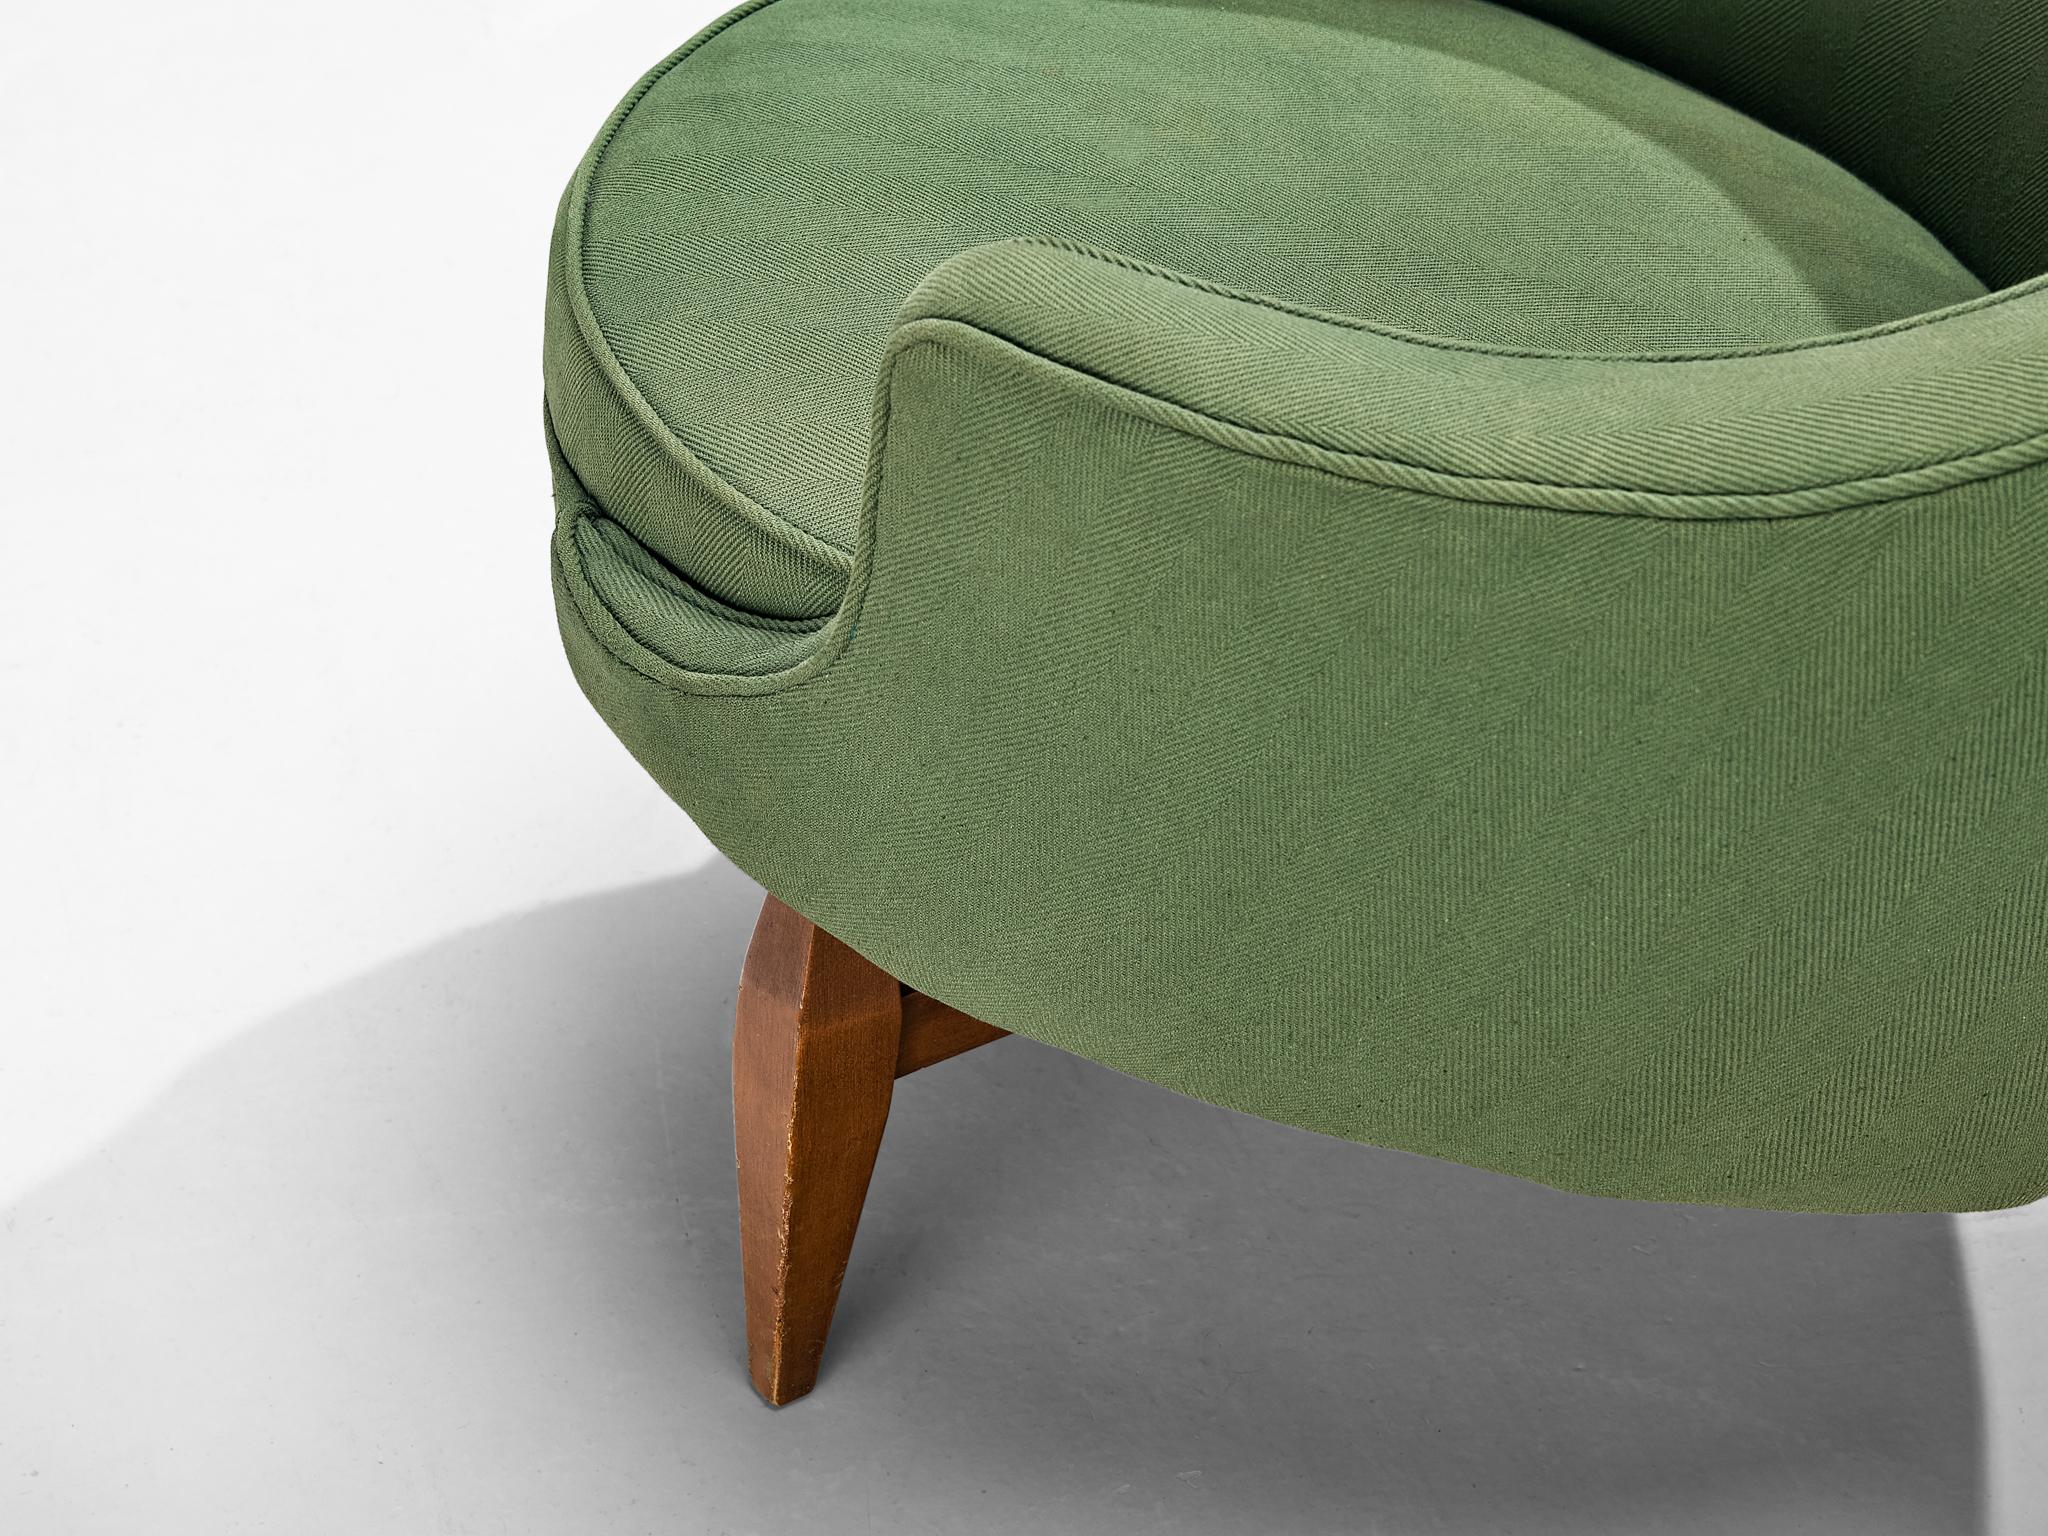 Mid-20th Century Italian Pair of Lounge Chairs with Soft Green Upholstery For Sale